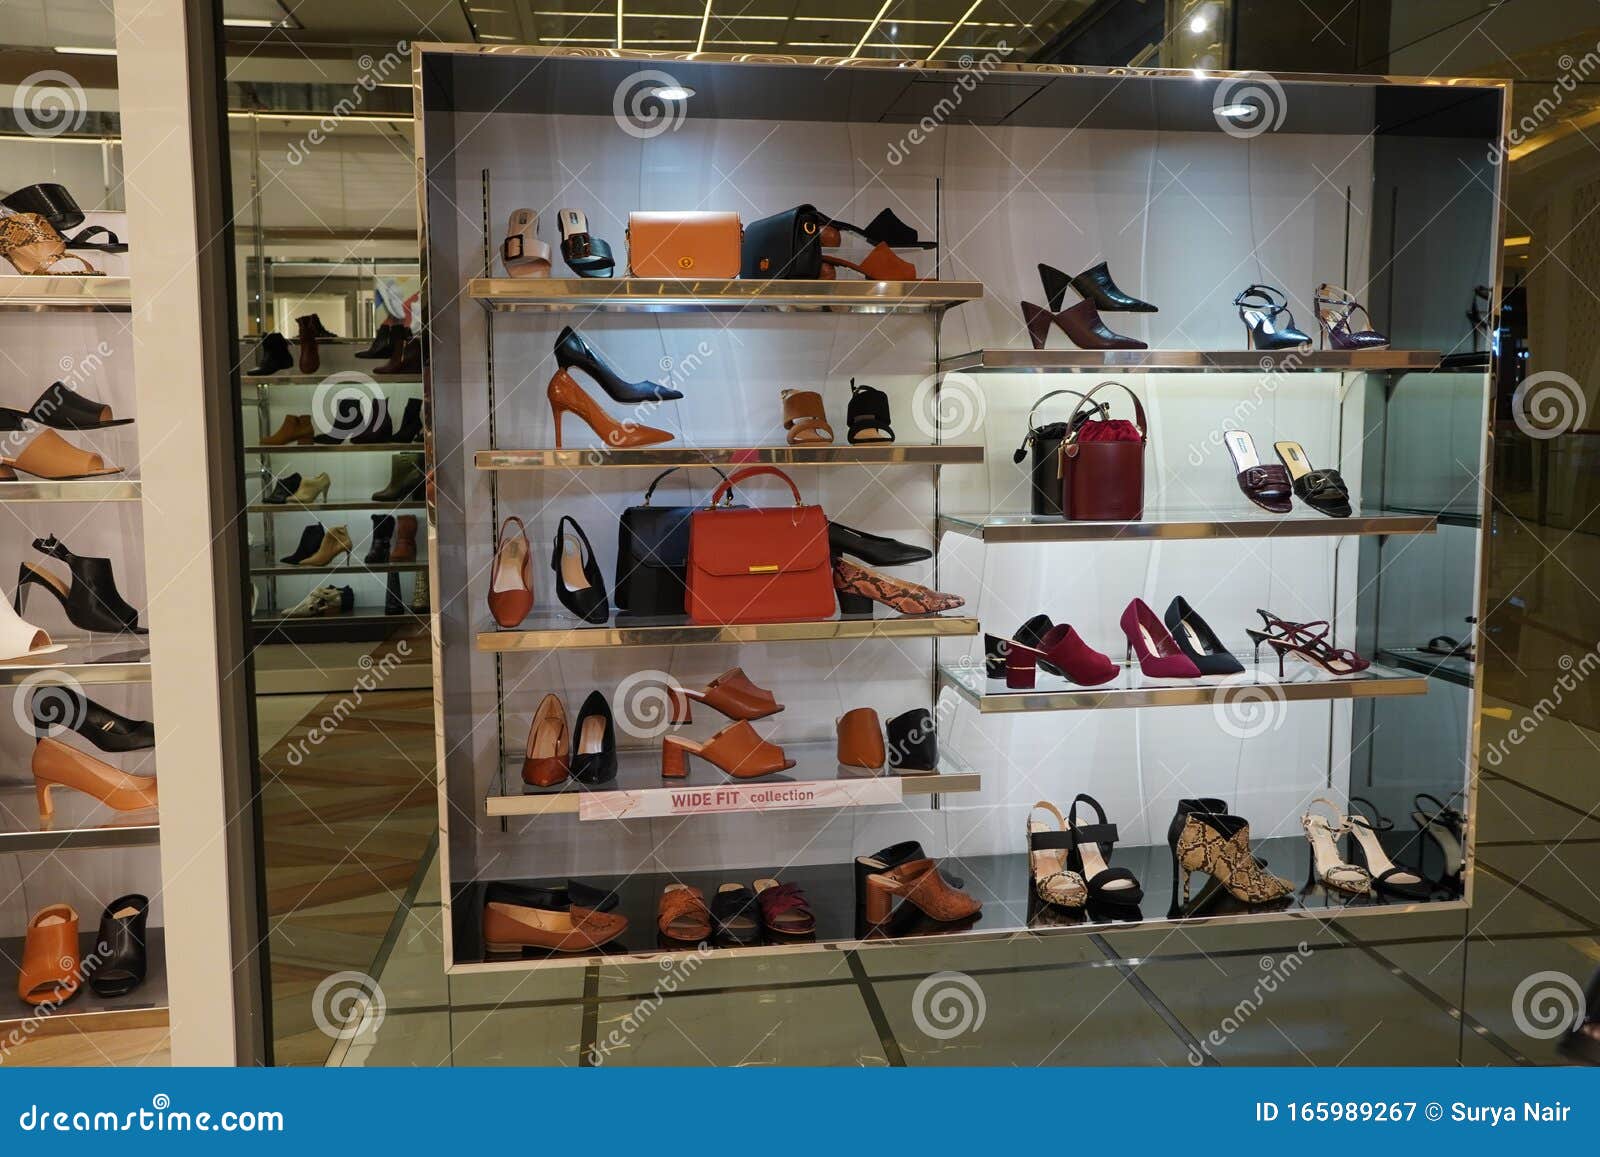 Dubai UAE December 2019 Shoes and Handbags in a Boutique Display. Rows ...